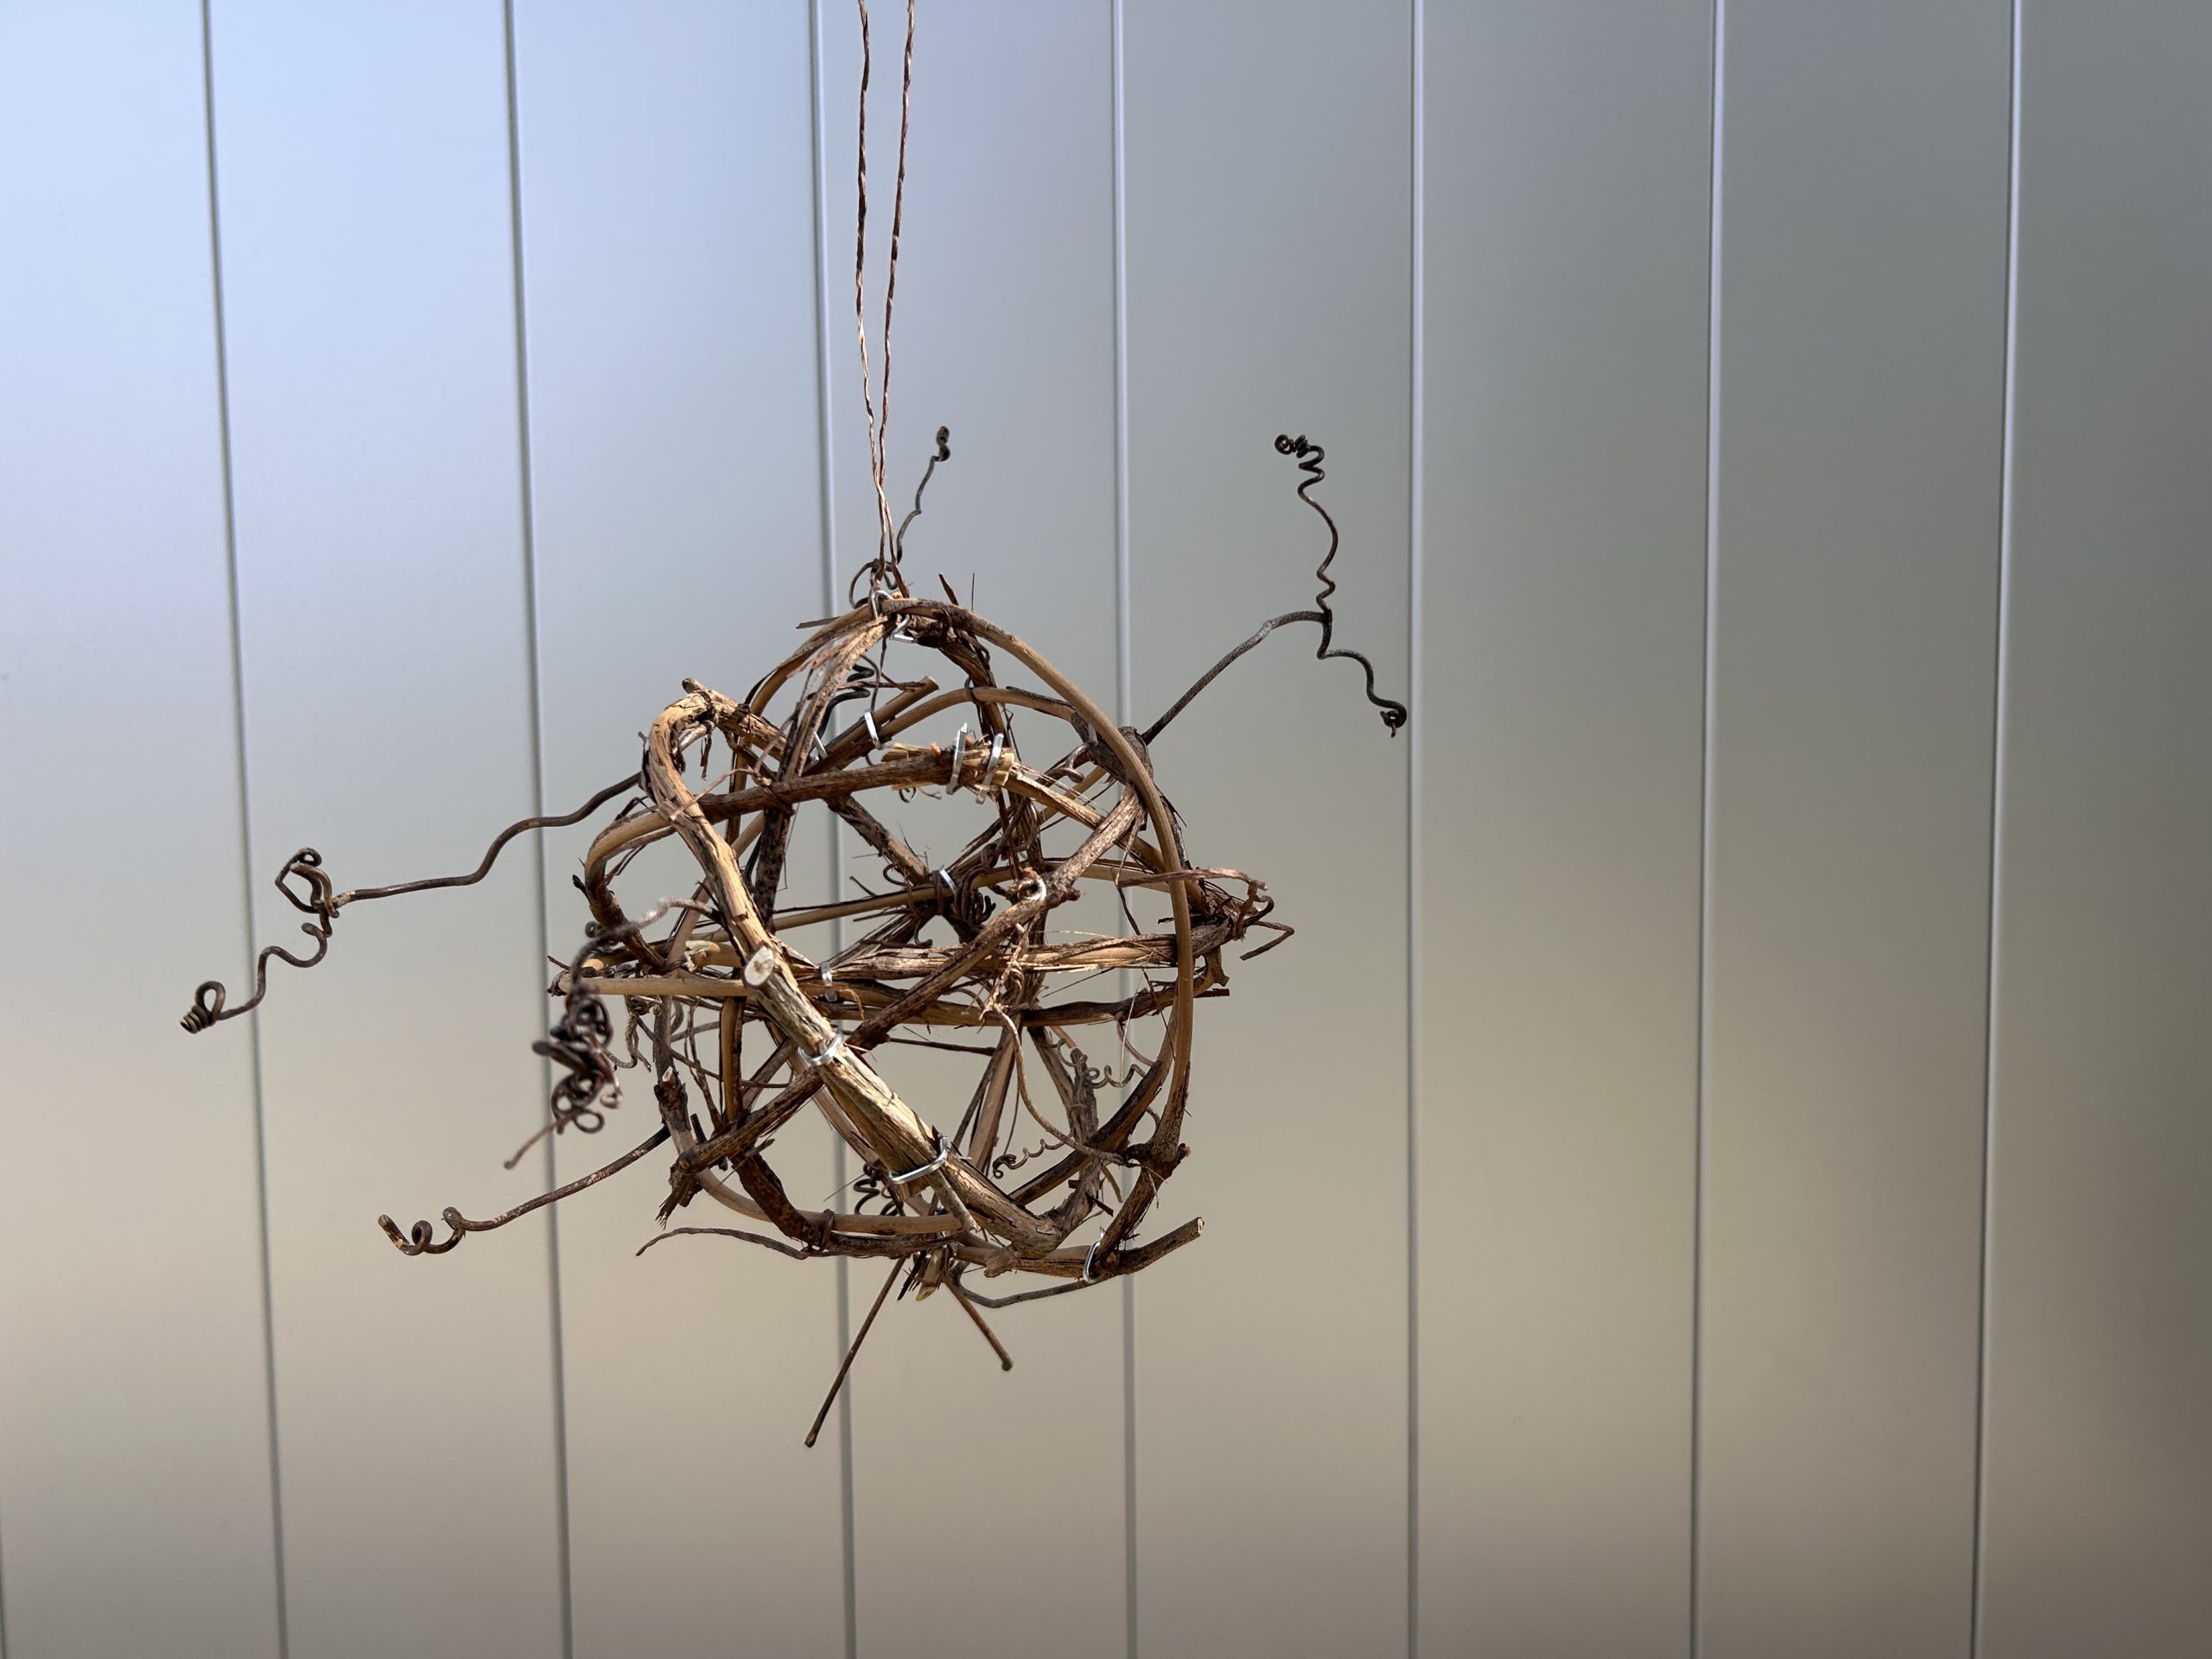 A sphere made of twisted vines hangs in front of a wall